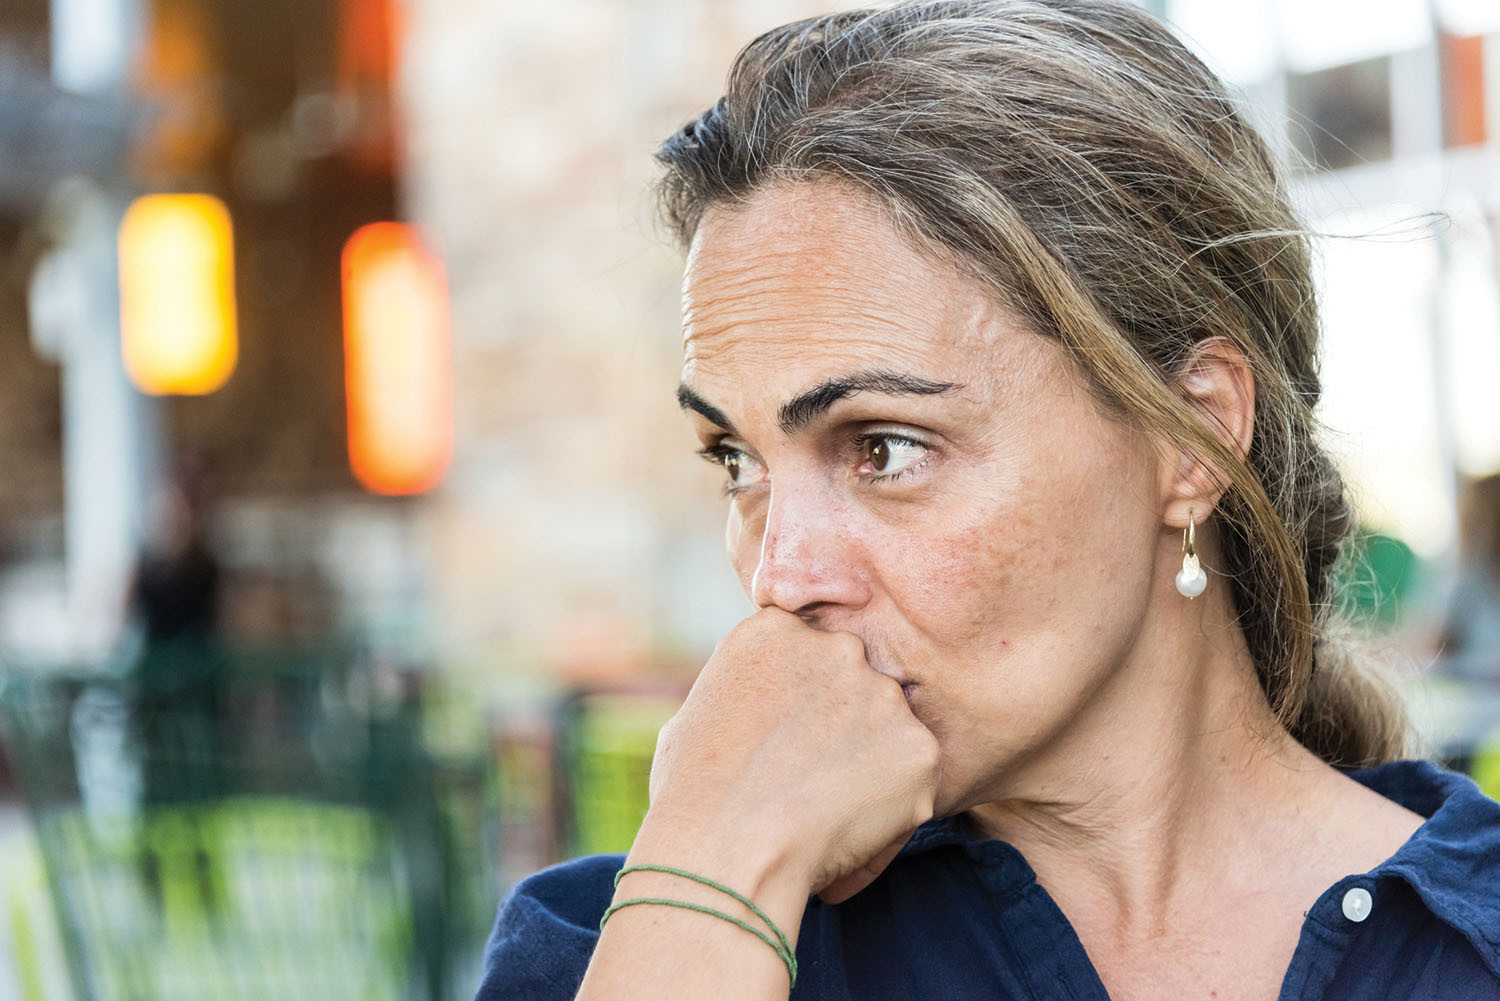 As menopause approaches, some women suffer 'brain fog' and memory